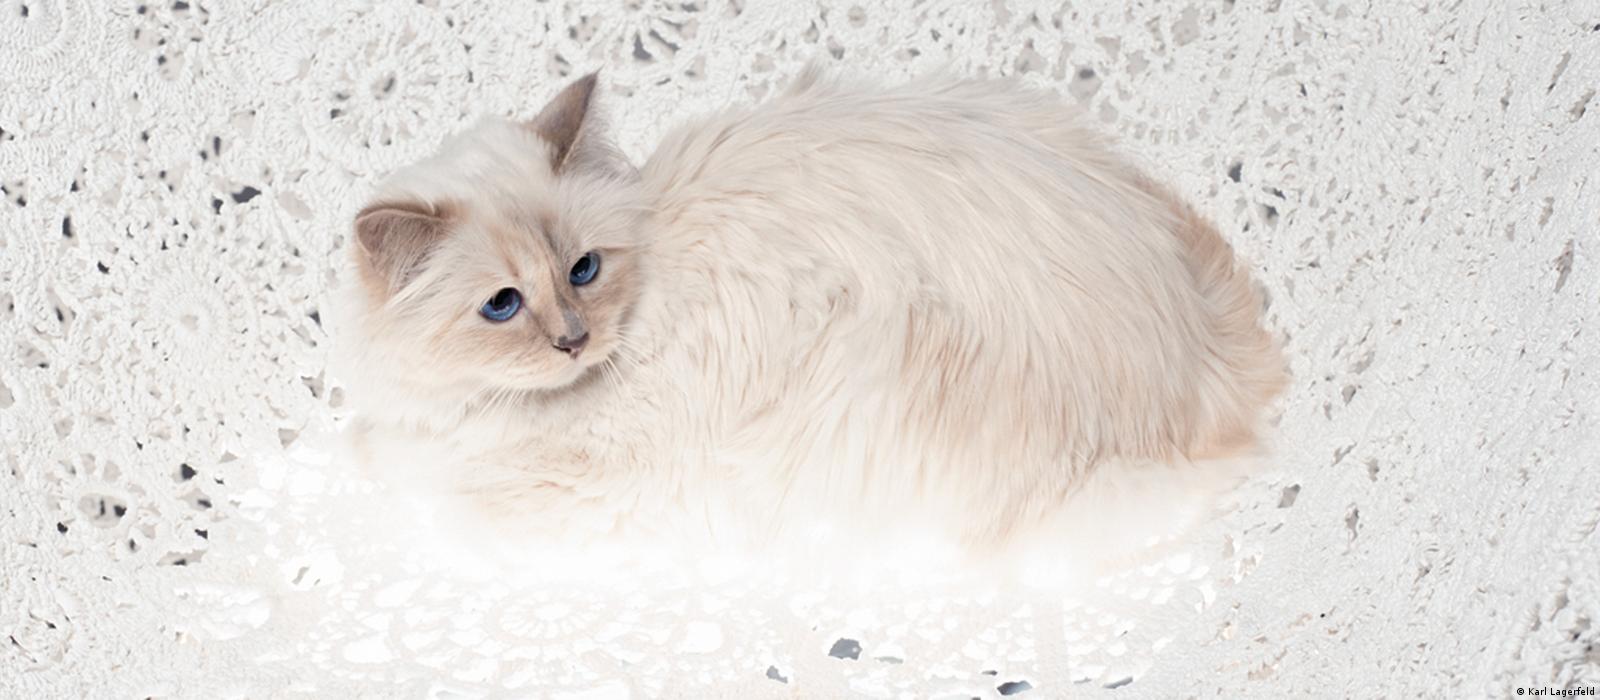 Karl Lagerfeld Would Marry His Cat Choupette If It Were Legal